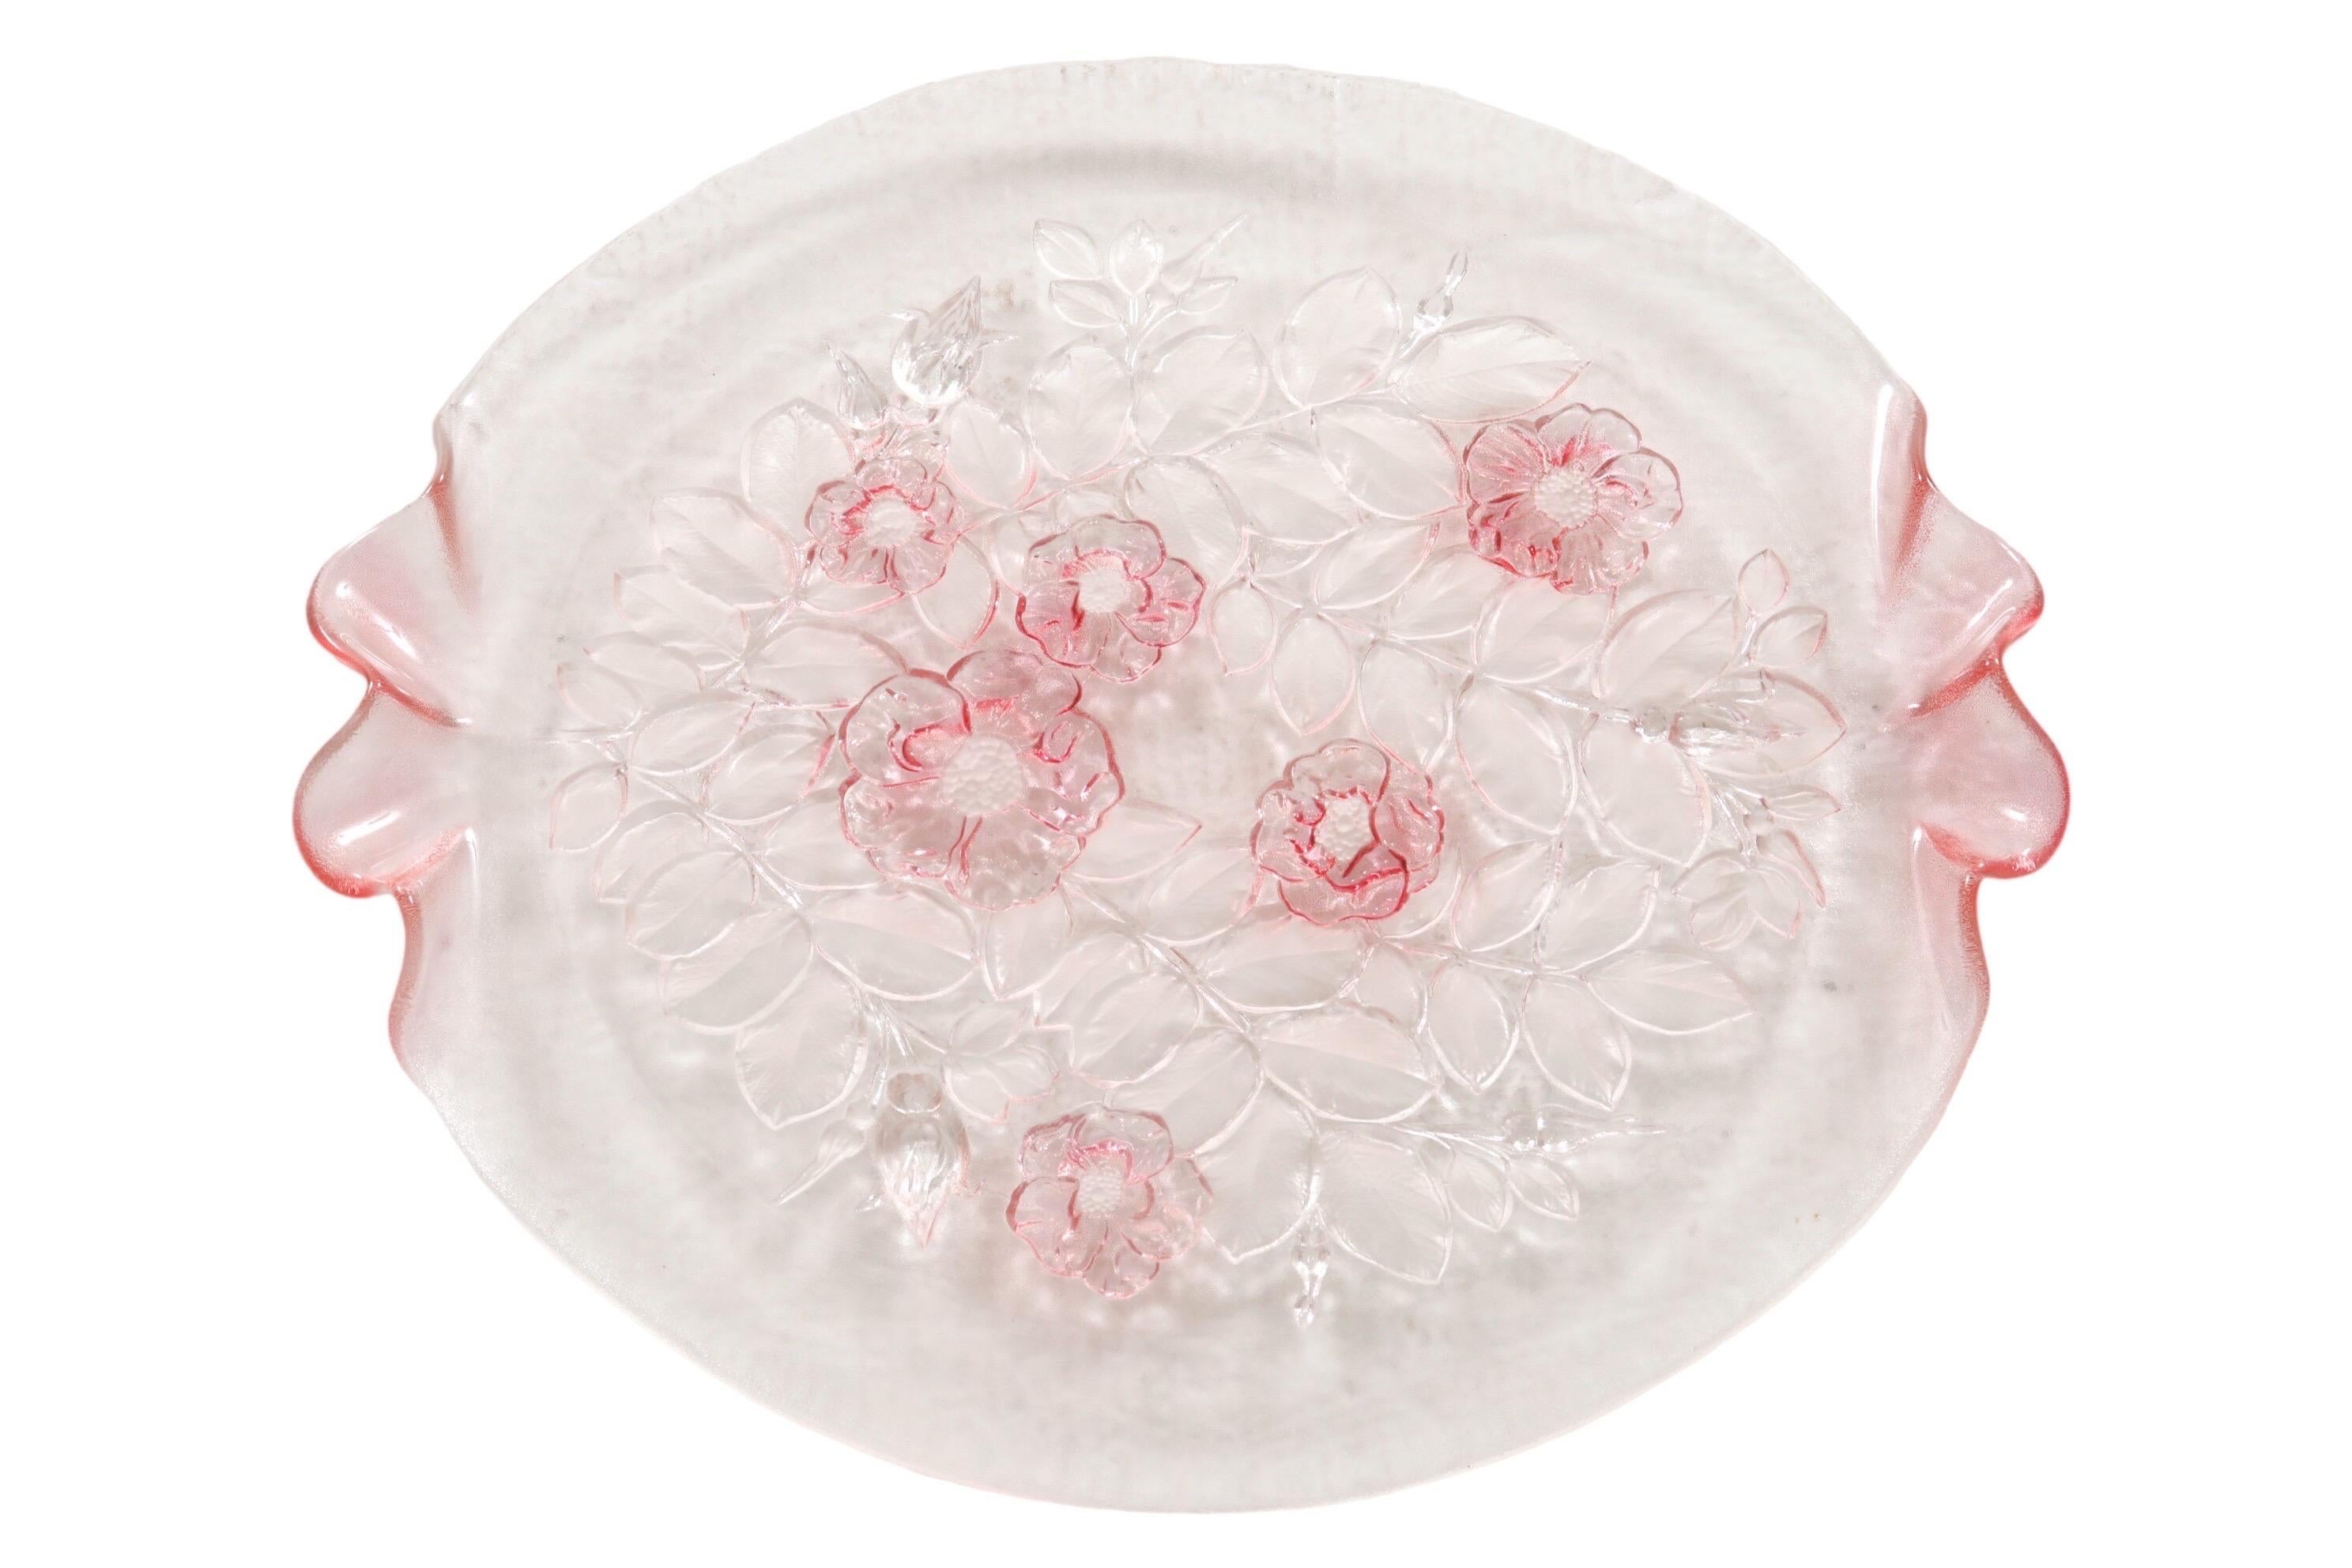 Rosella Glass Cake Plate by Mikasa In Good Condition For Sale In Bradenton, FL